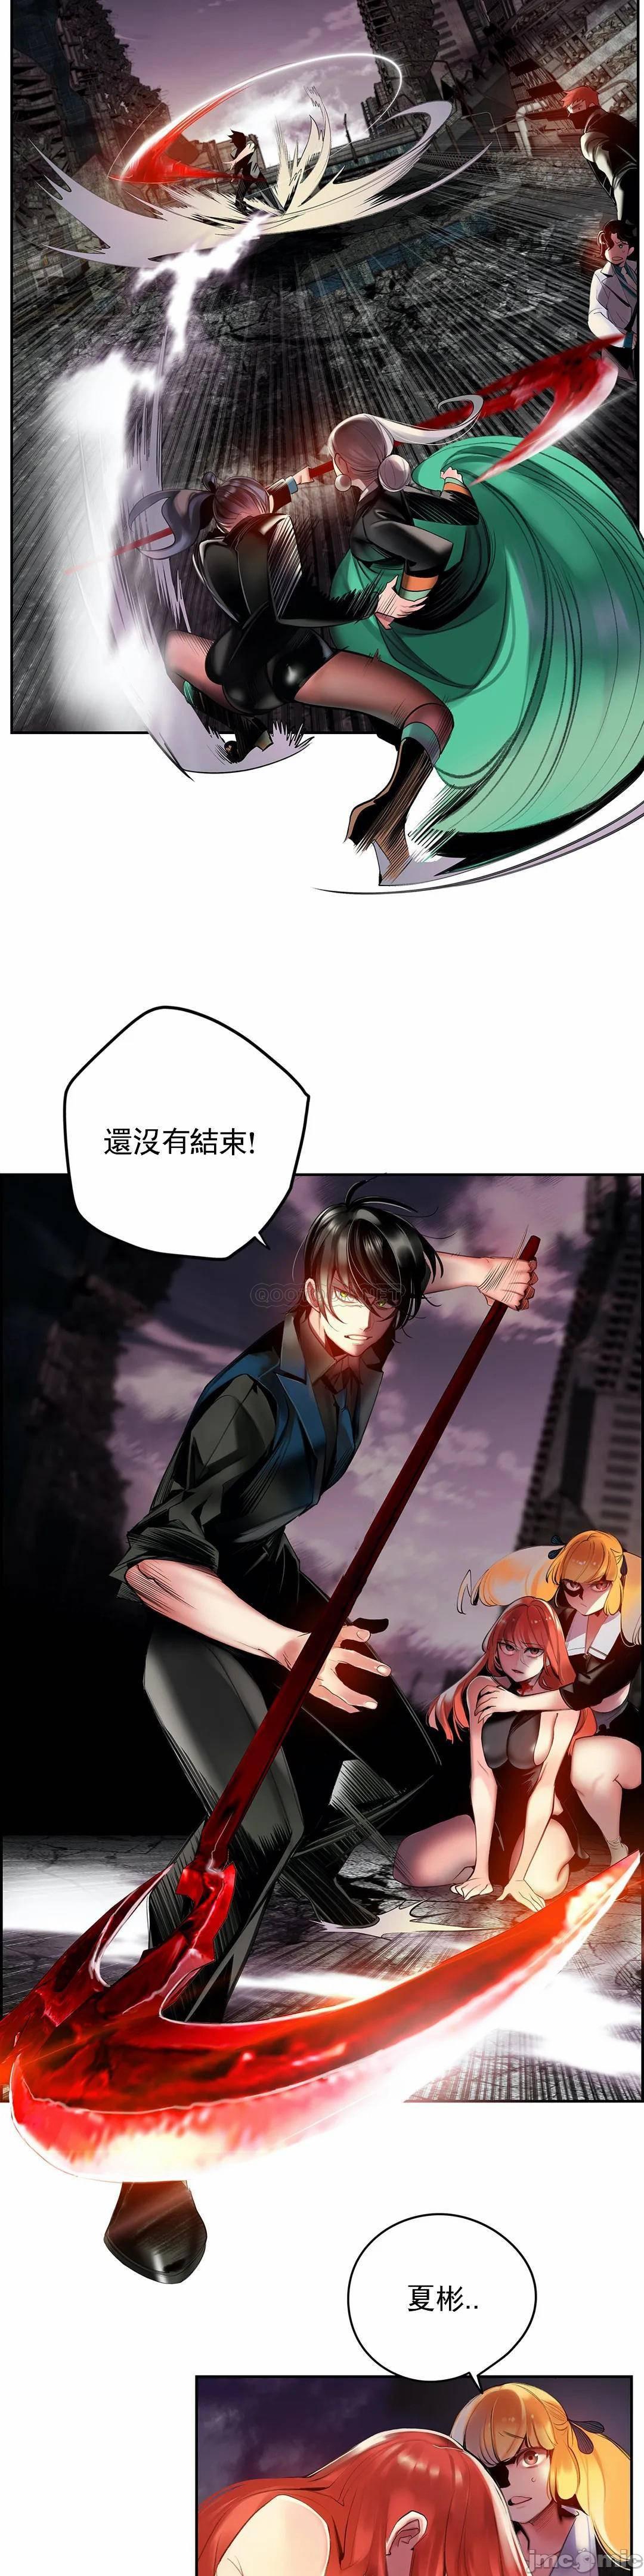 [Juder] Lilith`s Cord (第二季) Ch.77-93 end [Chinese] 354